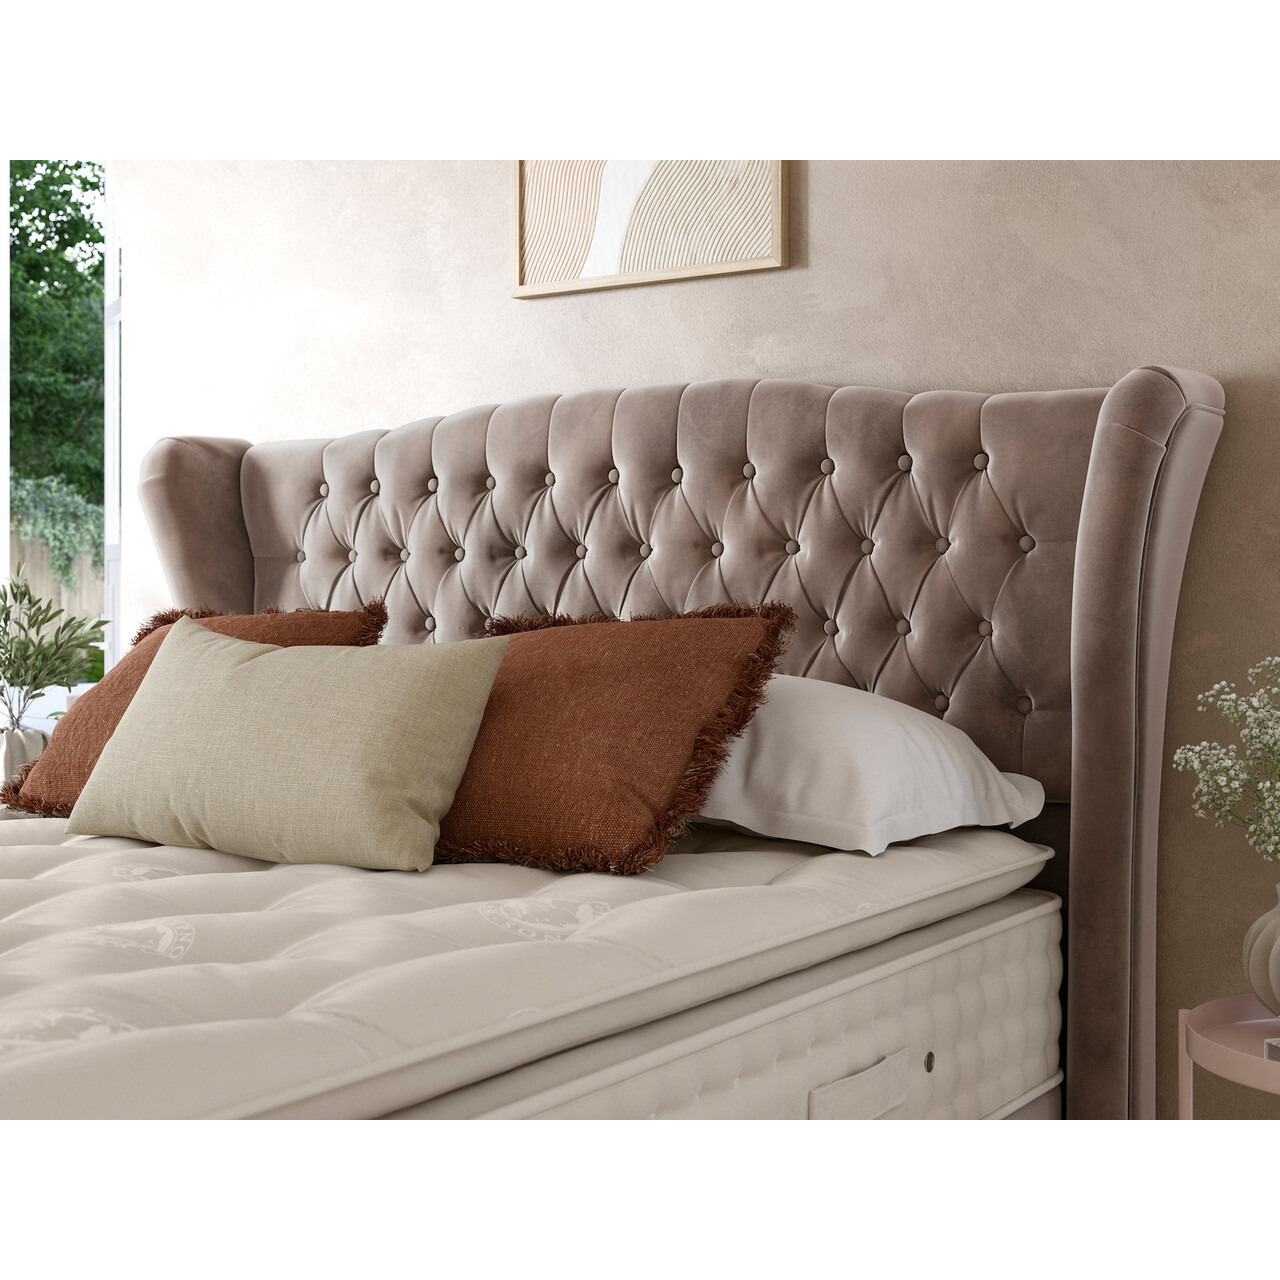 Staples & Co Belgravia Buttoned Hotel Height Headboard - image 1